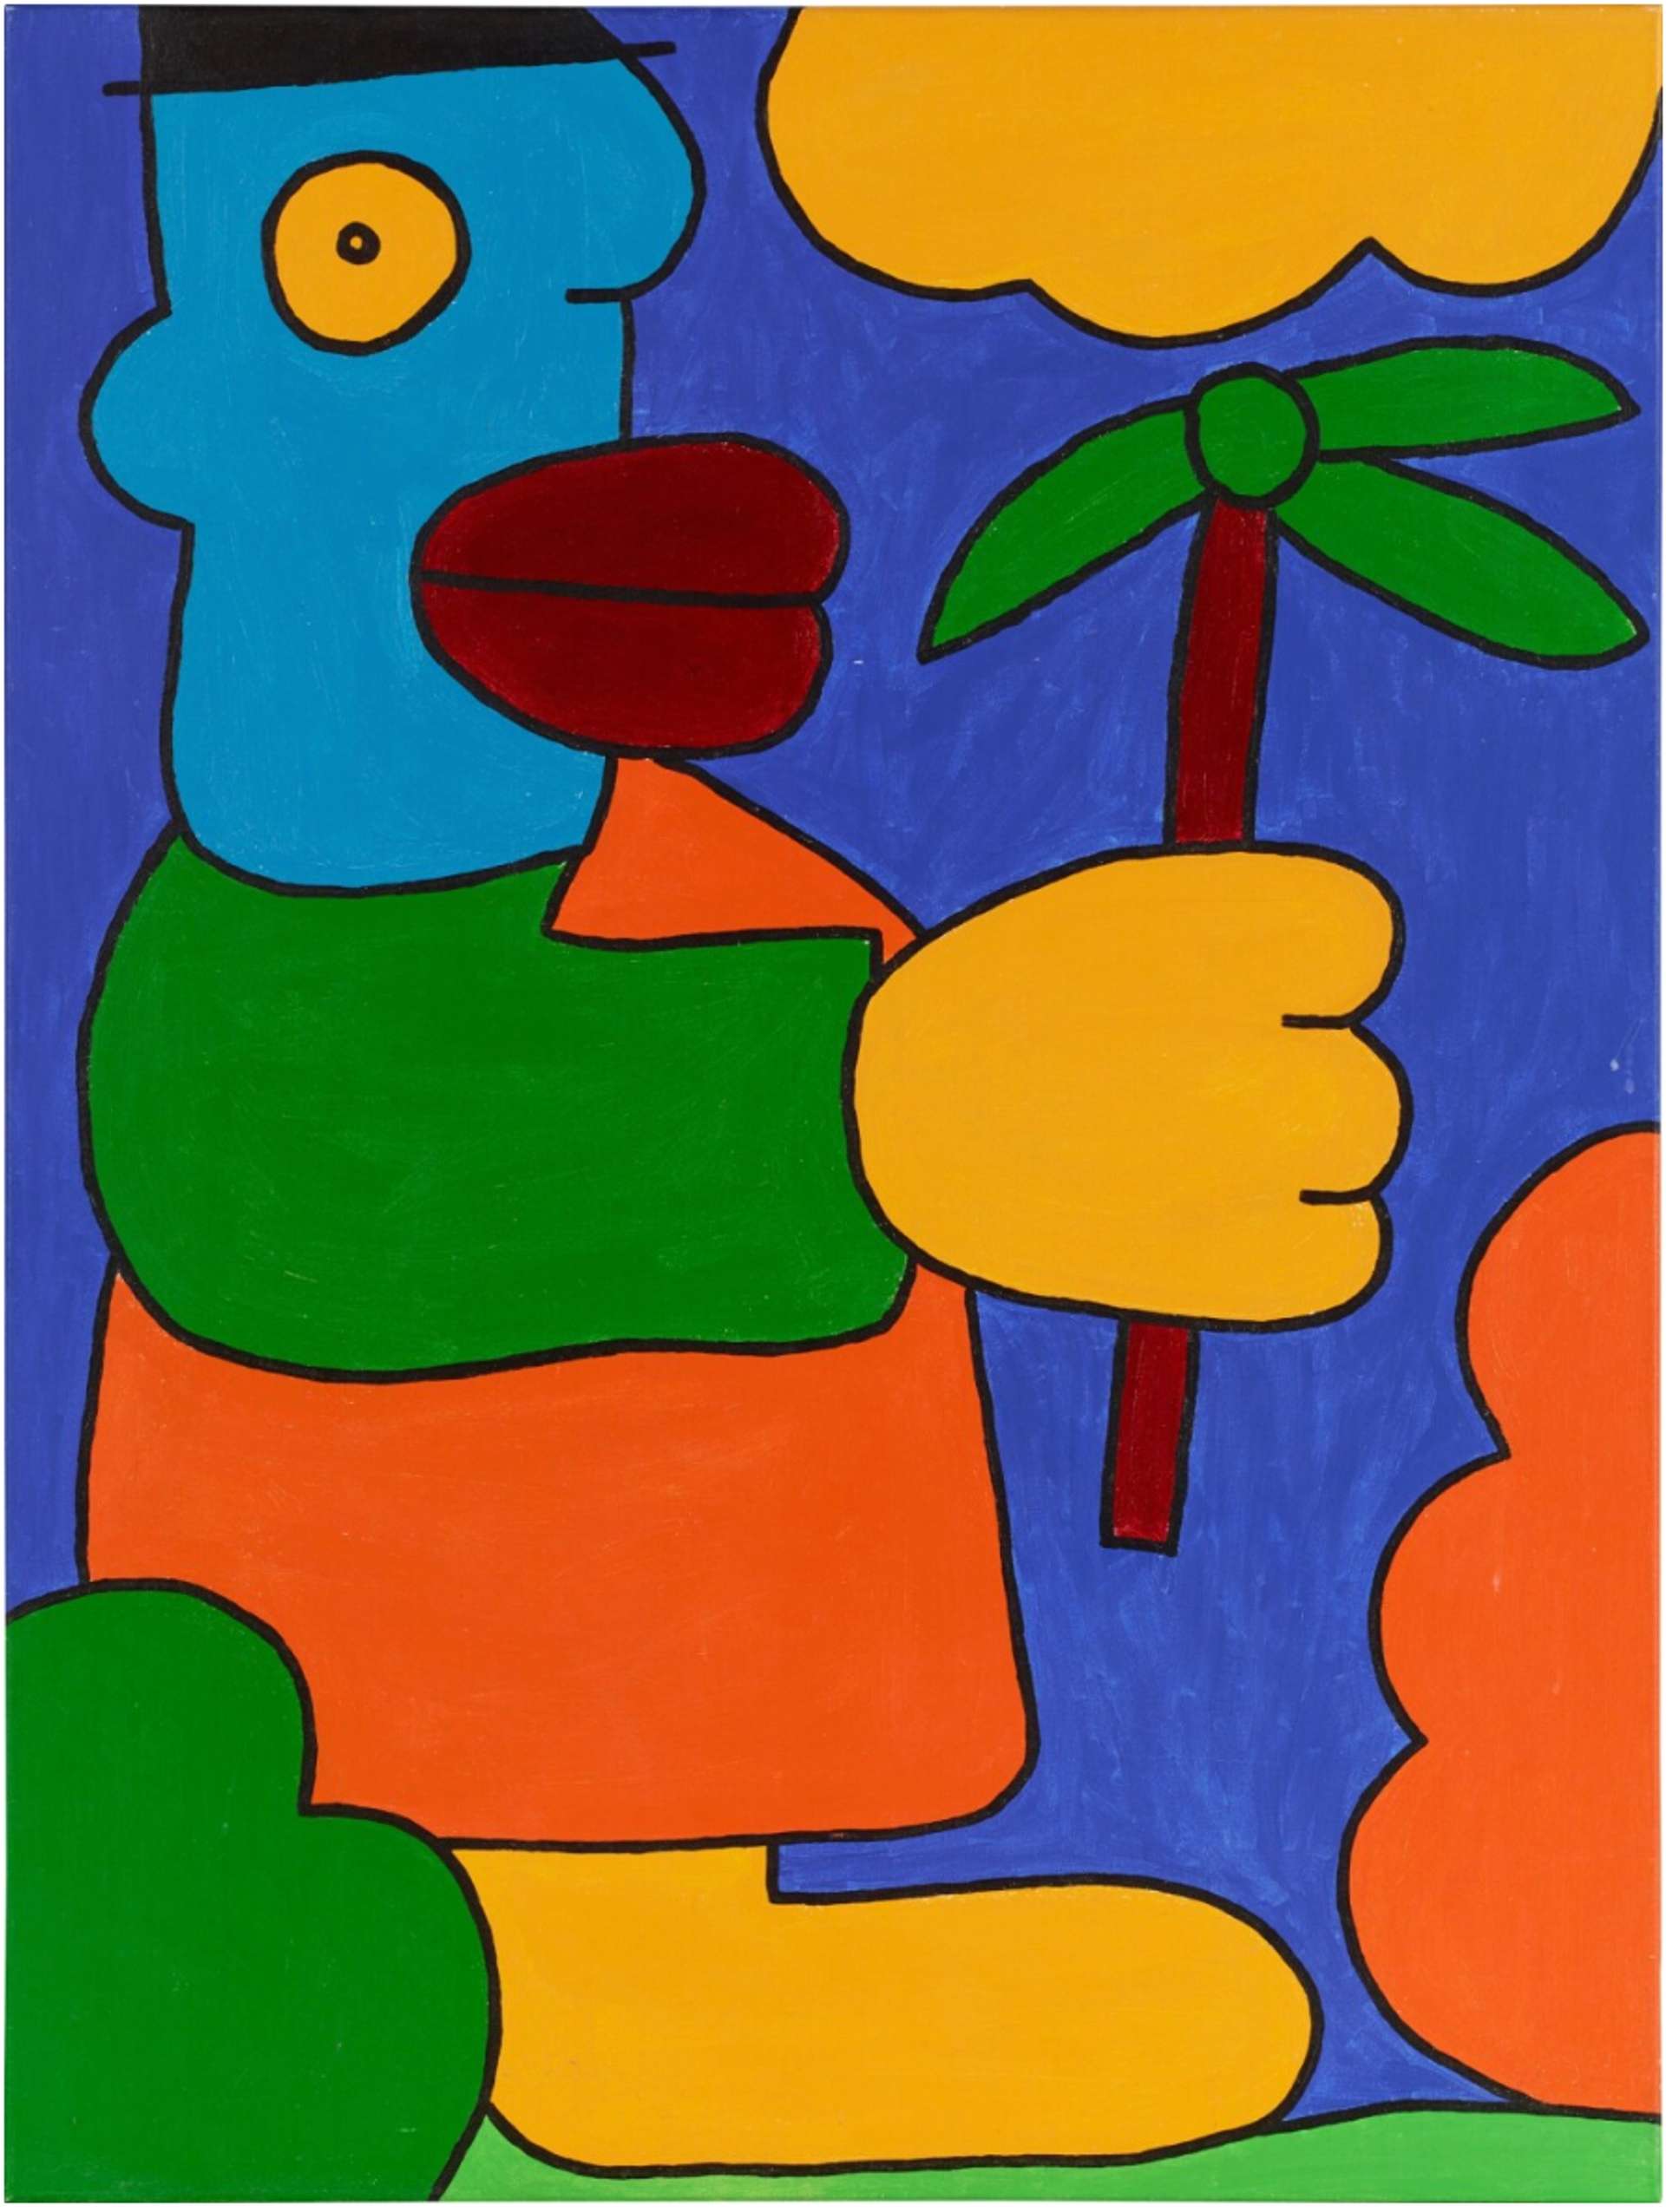  A vibrant abstracted palette of blue, green, orange, yellow, red, and brown. A bold black line creates a scenery with green grass, and a two-dimensional caricature figure walks staring the viewer in a side profile, holding either a three-petaled green flower or a windmill in its hand.